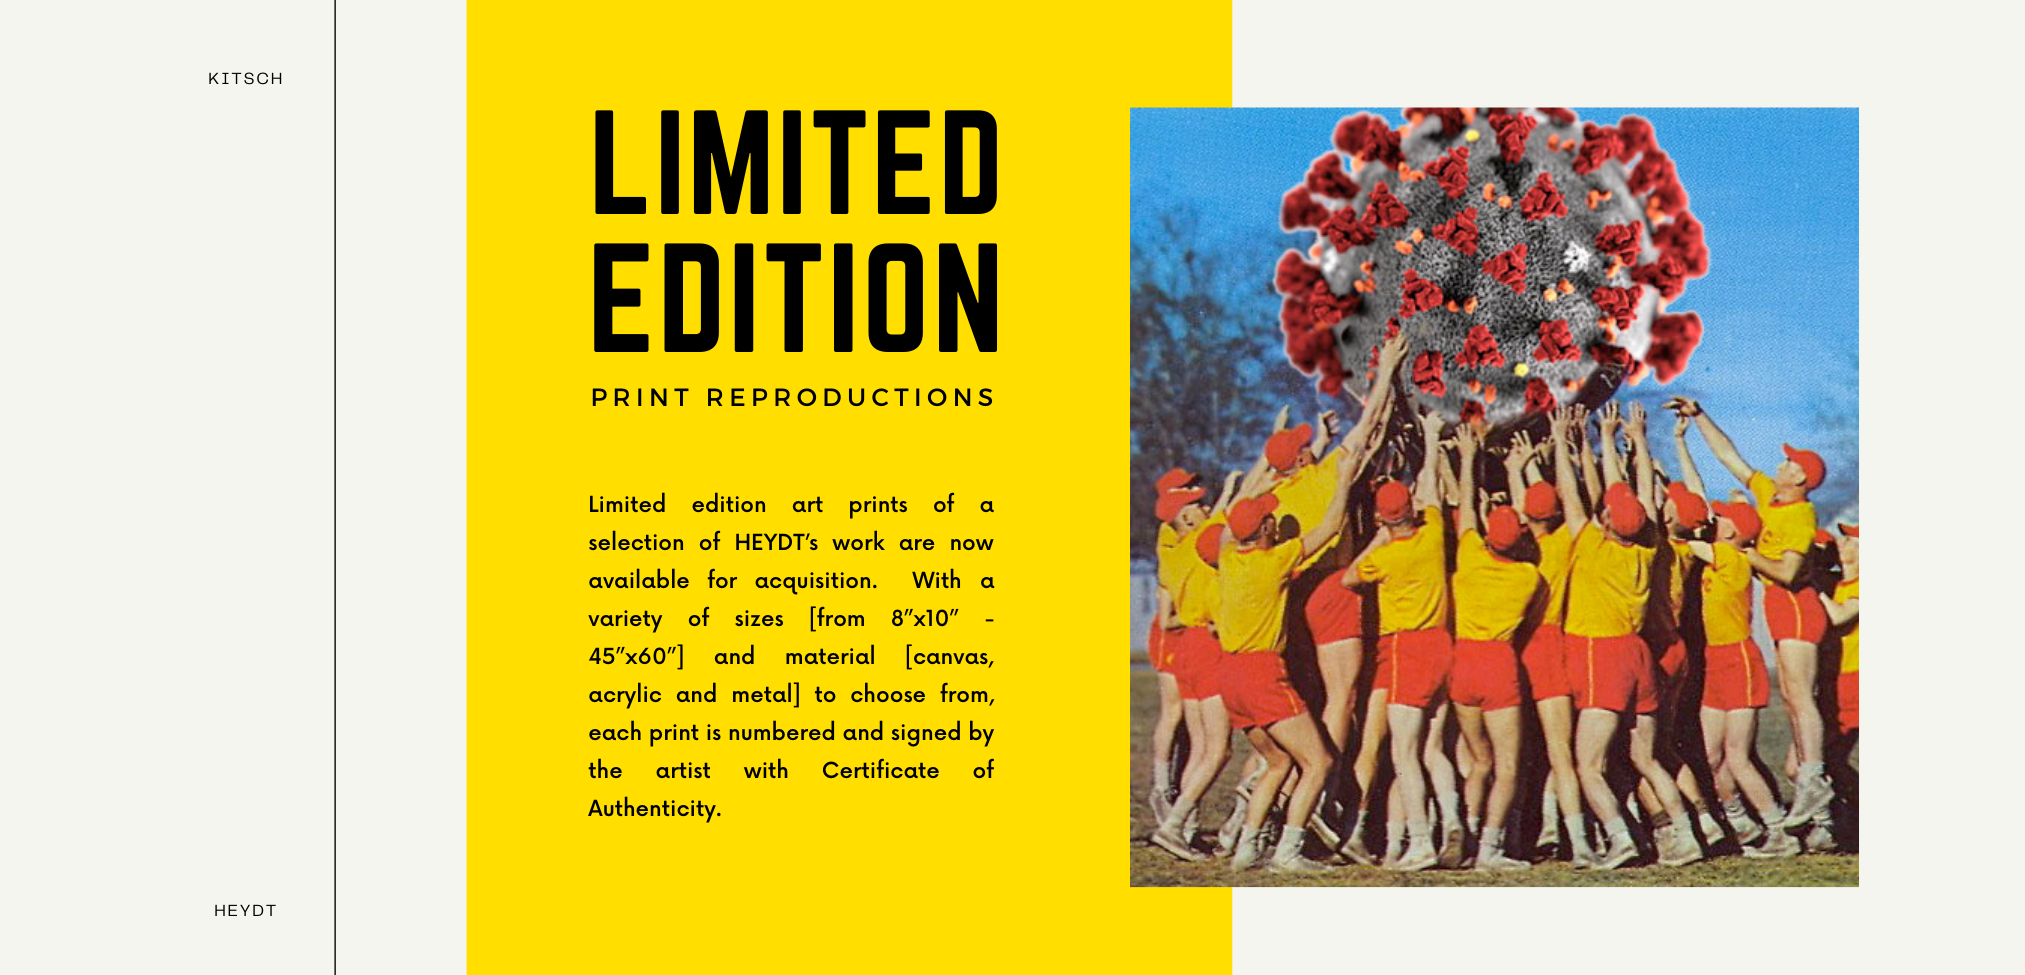 limited edition prints-KITSCH-HEYDT2.png